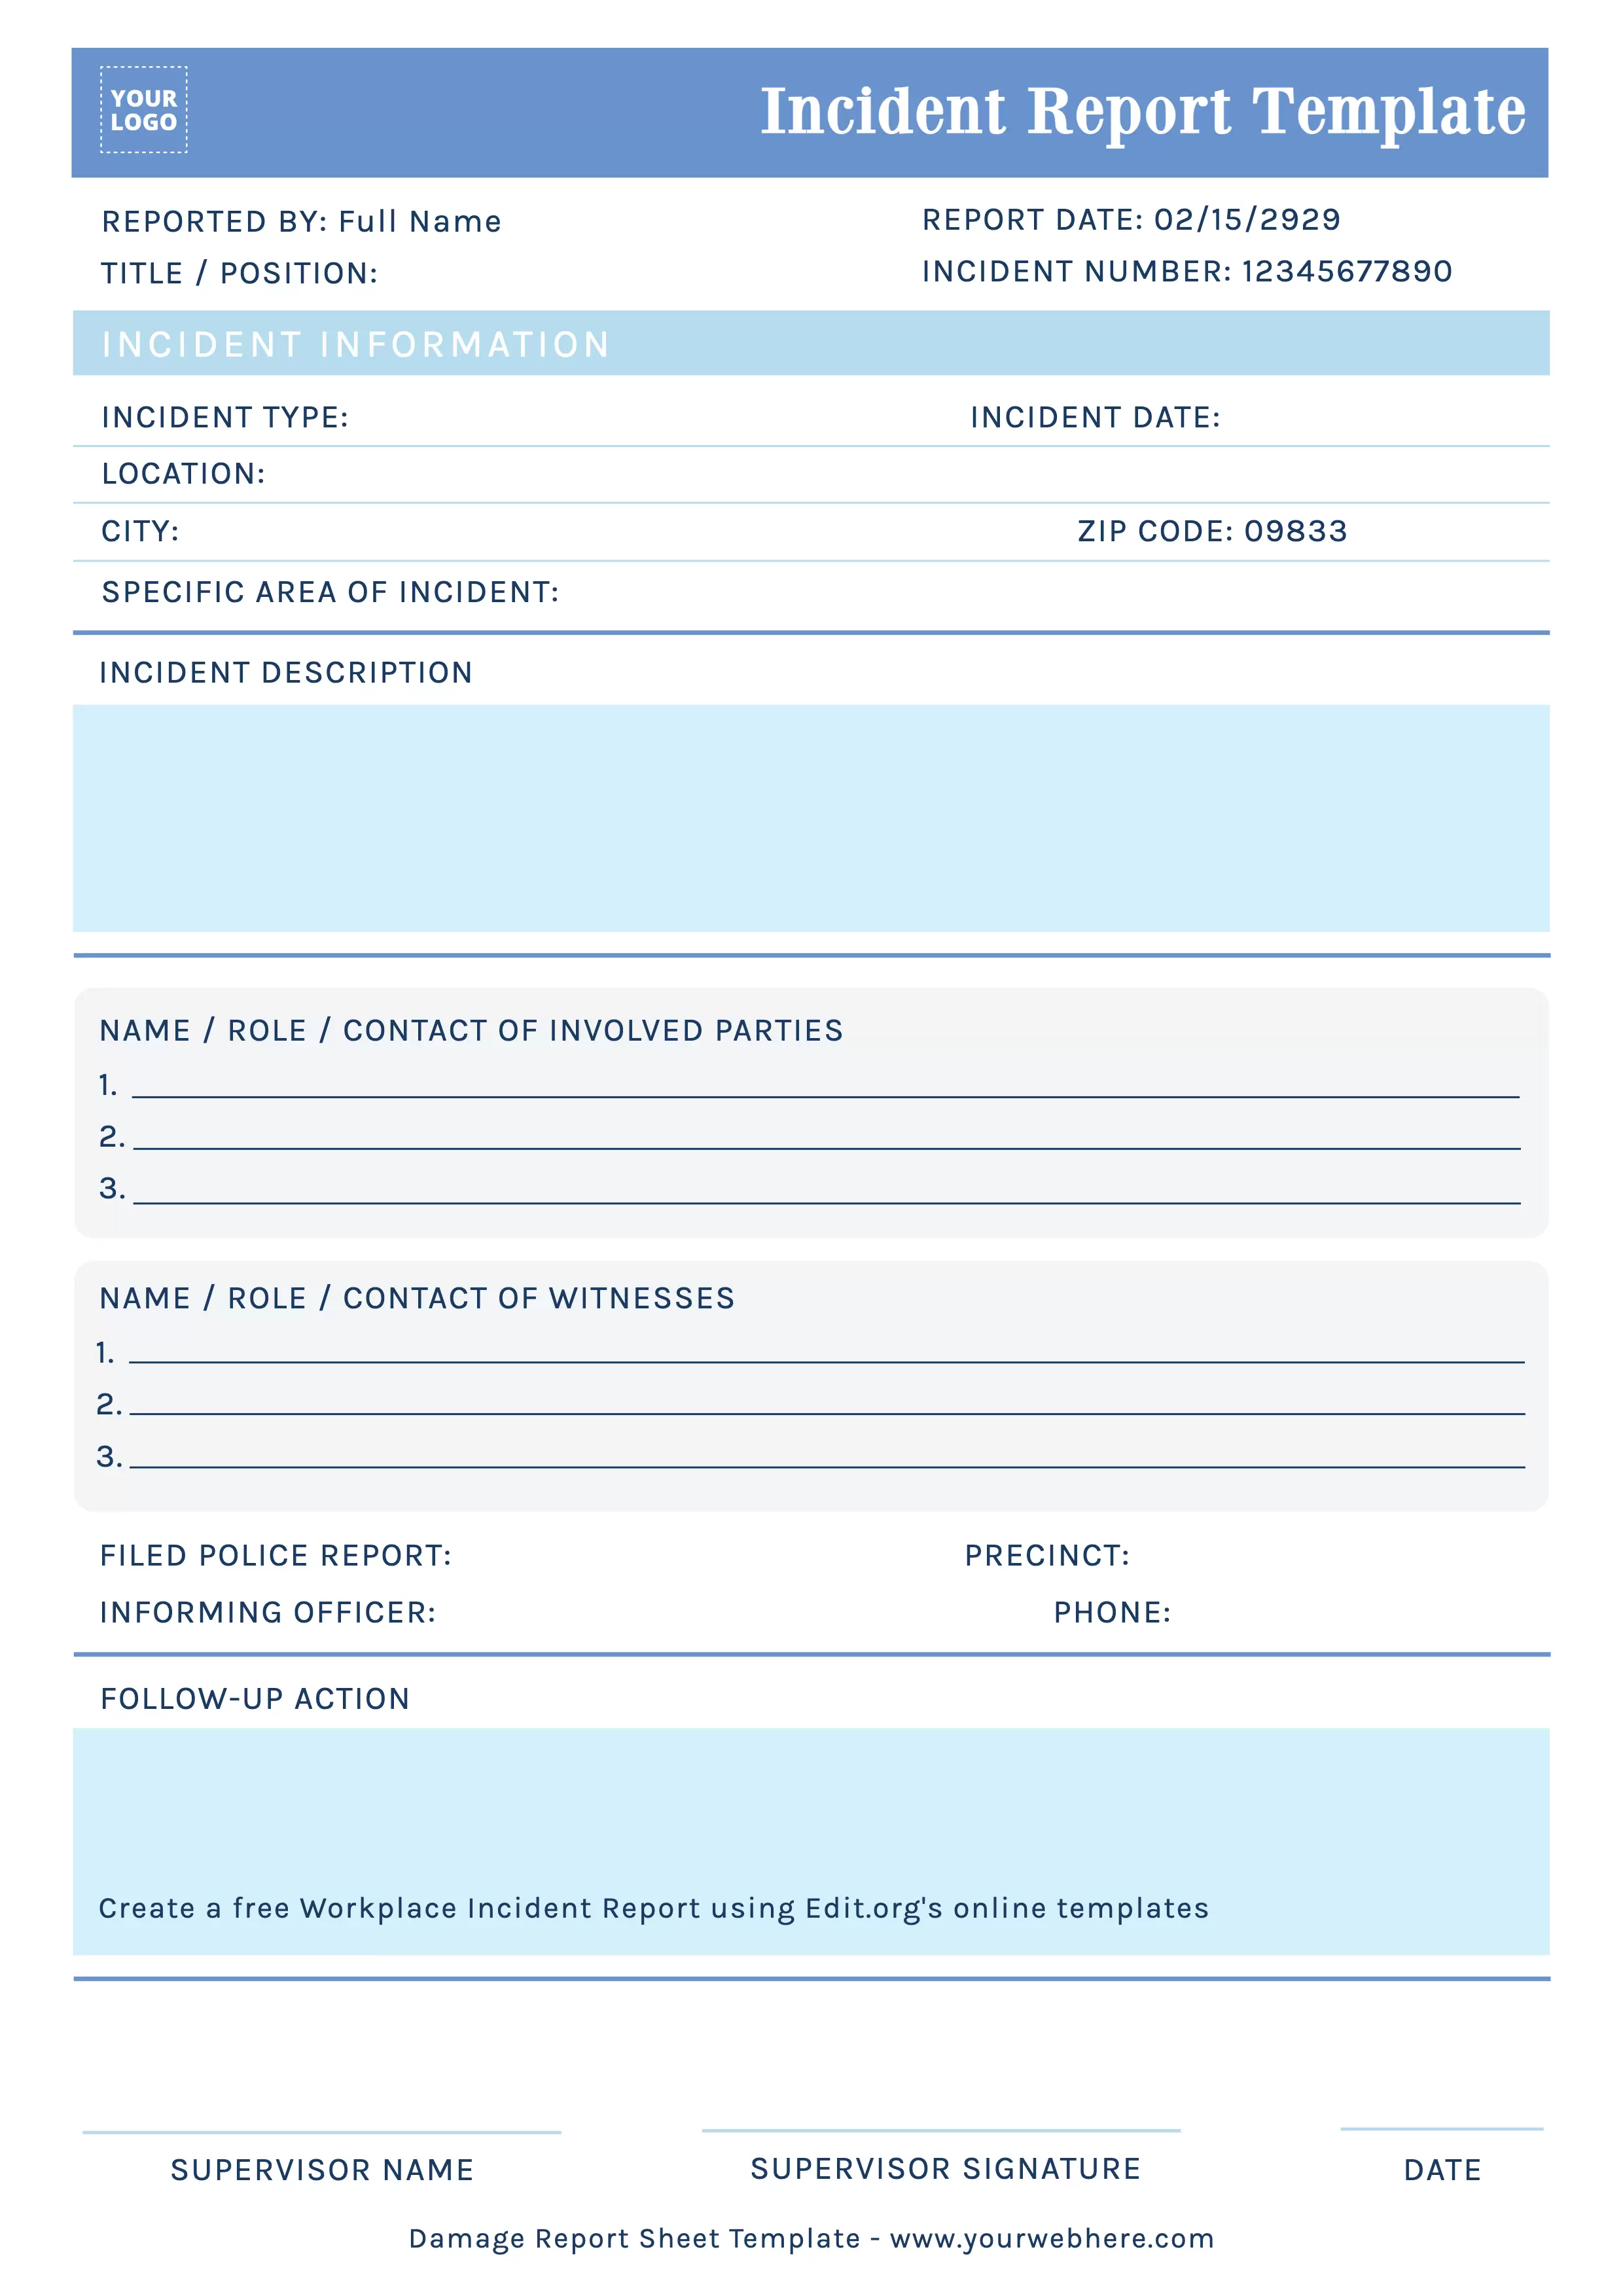 Printable sample format for Incident Report customizable online